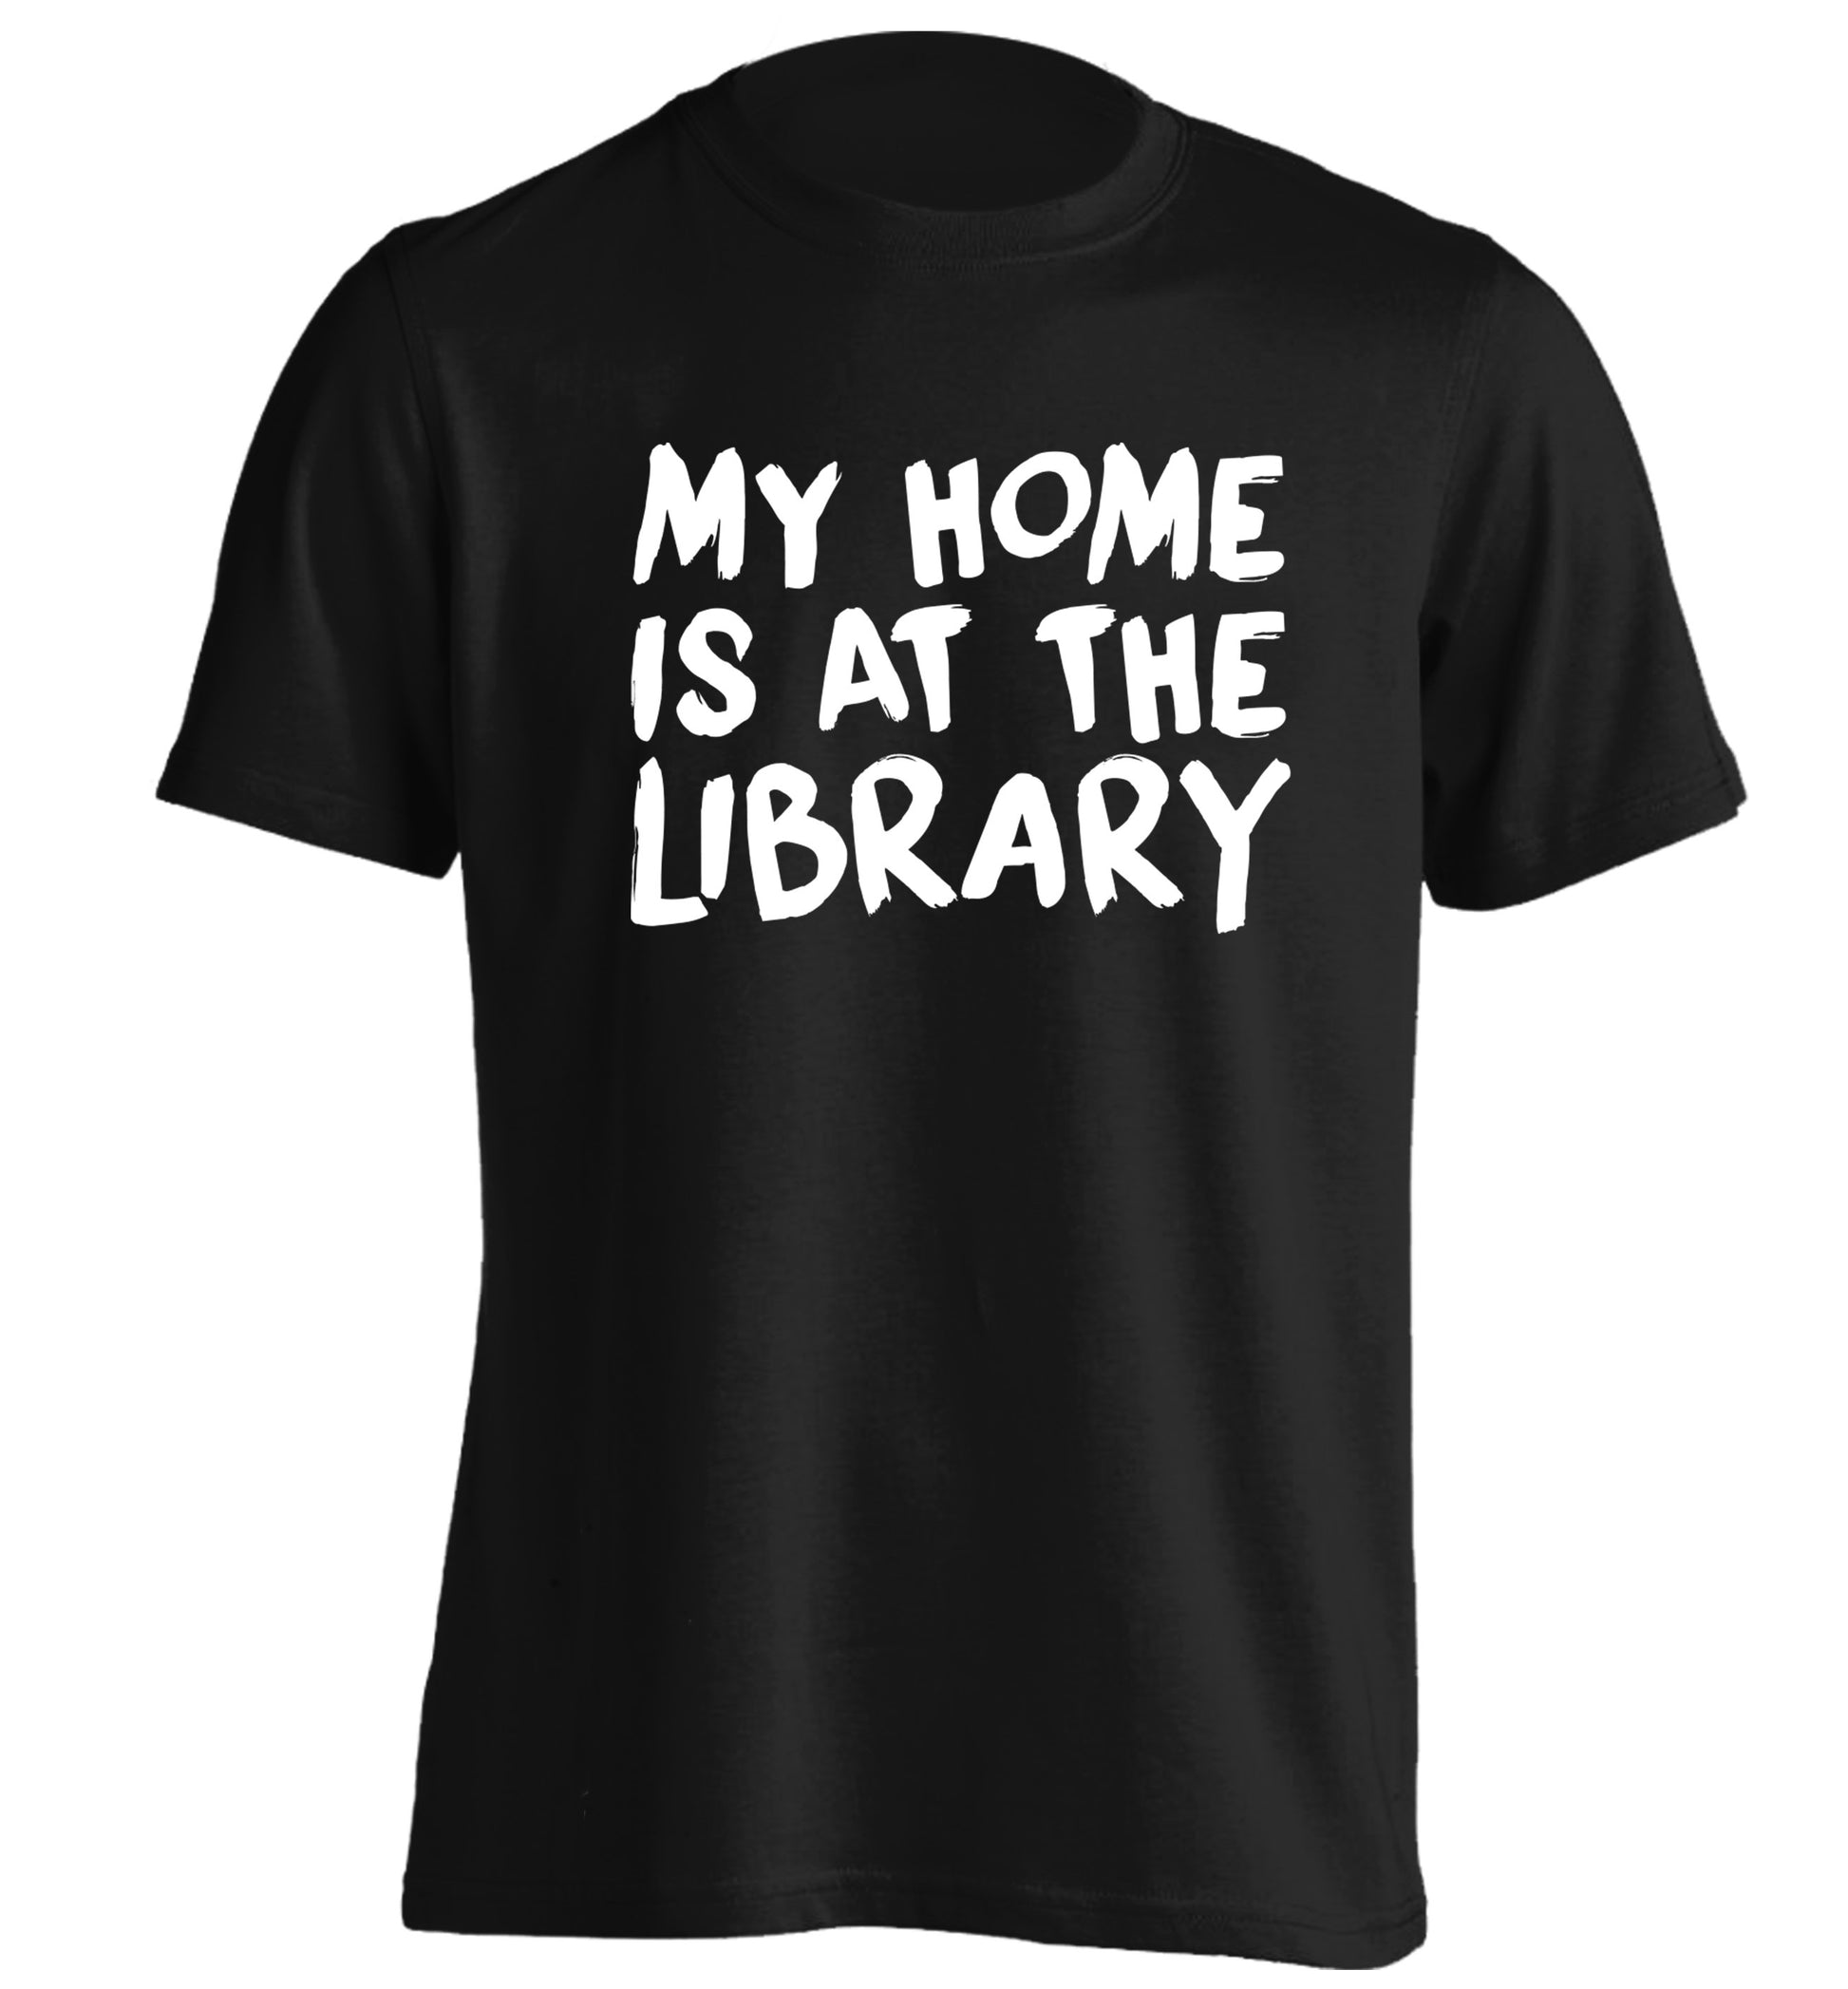 My home is at the library adults unisex black Tshirt 2XL